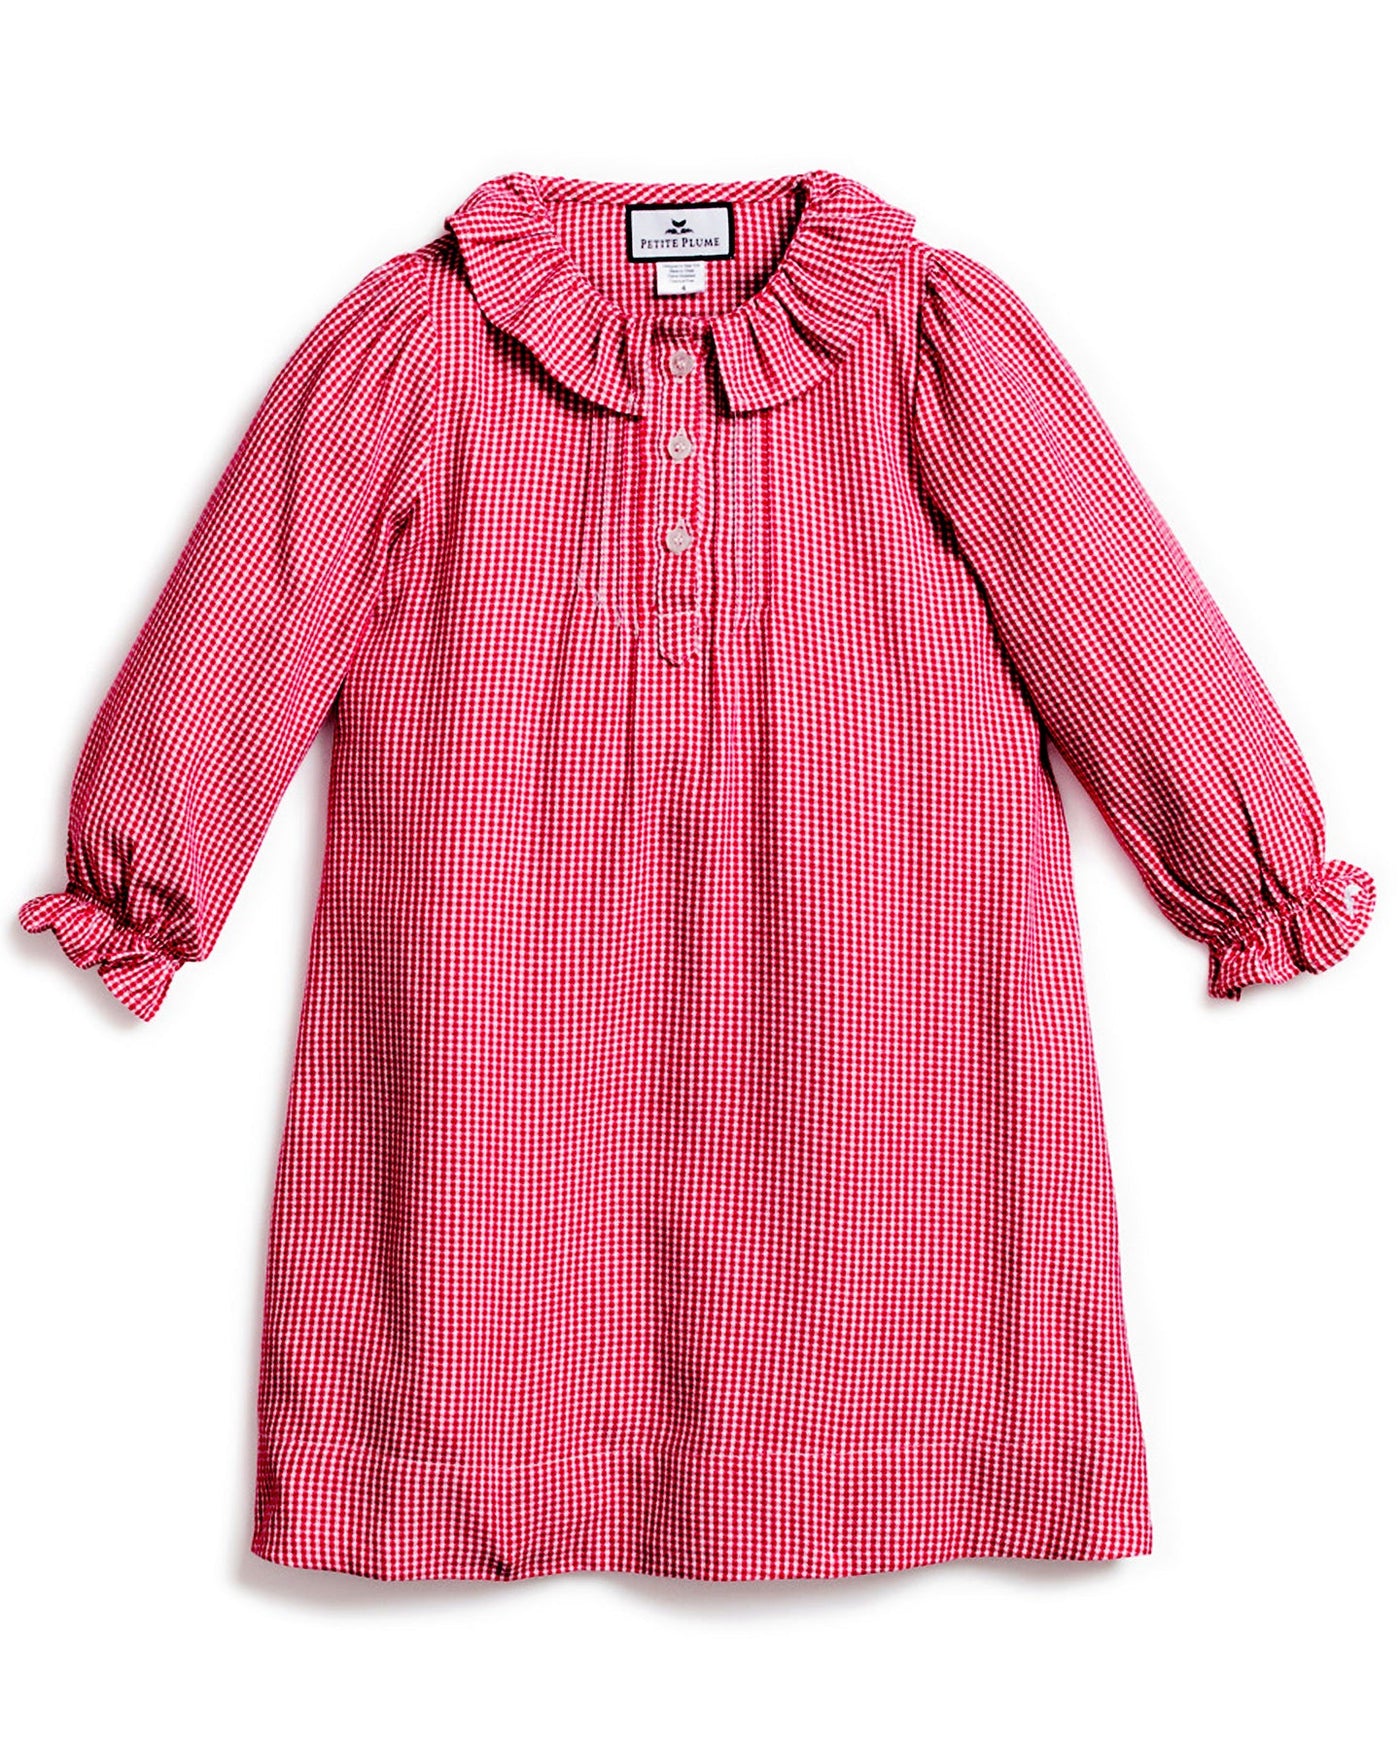 NIGHTGOWN BABY MINI RED LONG SLEEVE (Available in 3 Sizes)